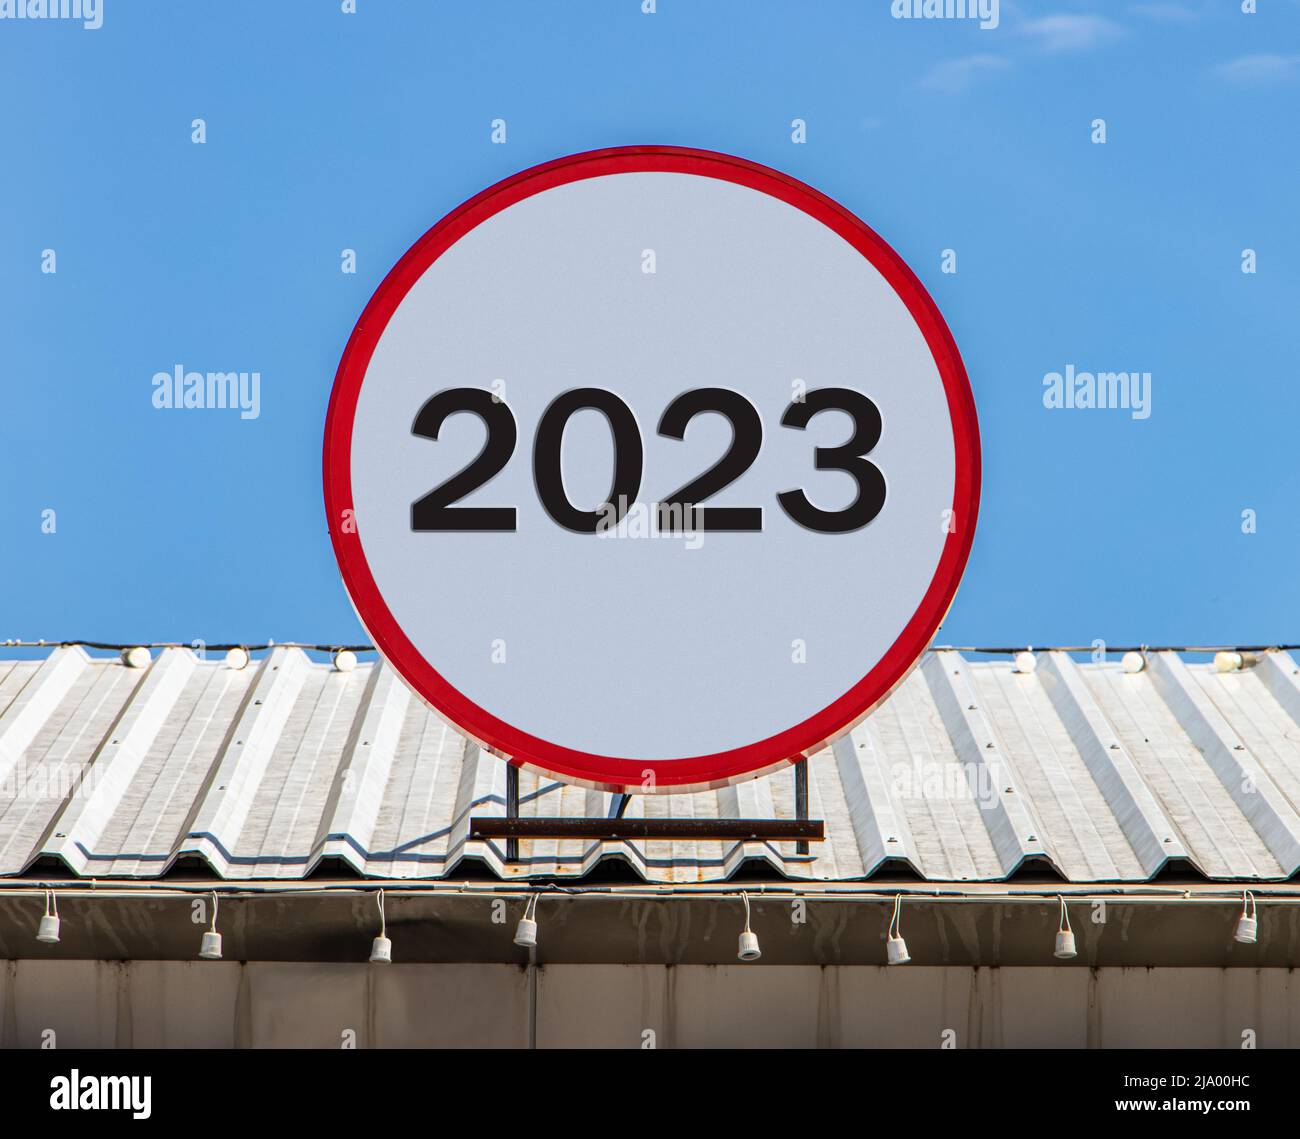 A Circle billboard with number 2023, is installed on a roof. Greeting for New Year 2023. Stock Photo